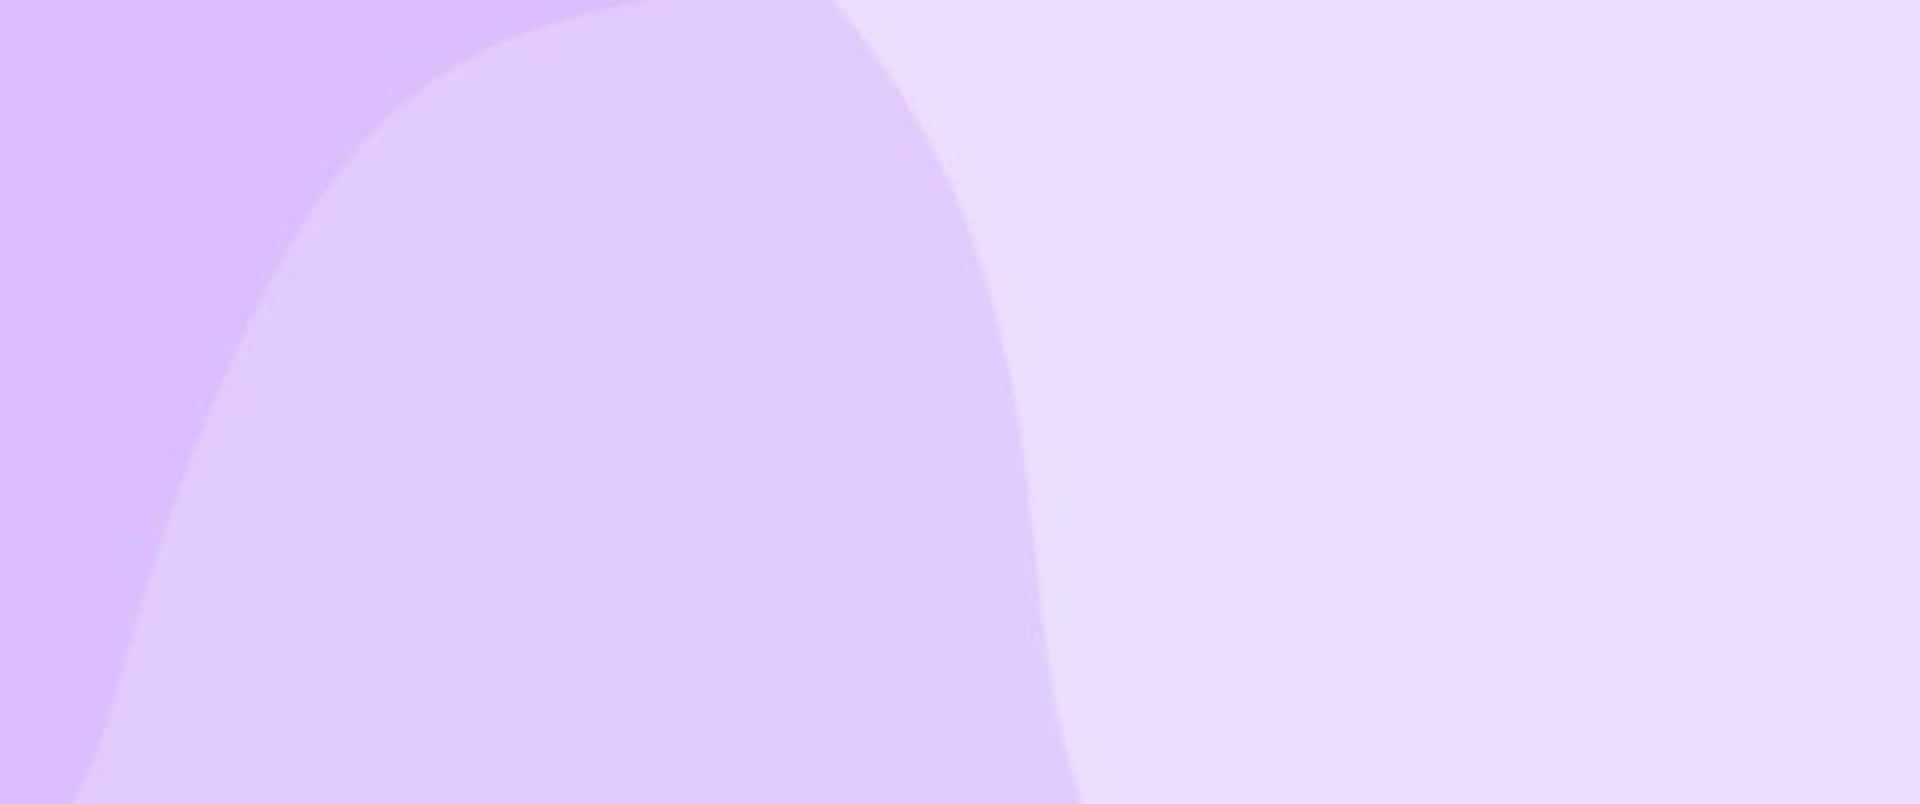 A vivid purple and white background